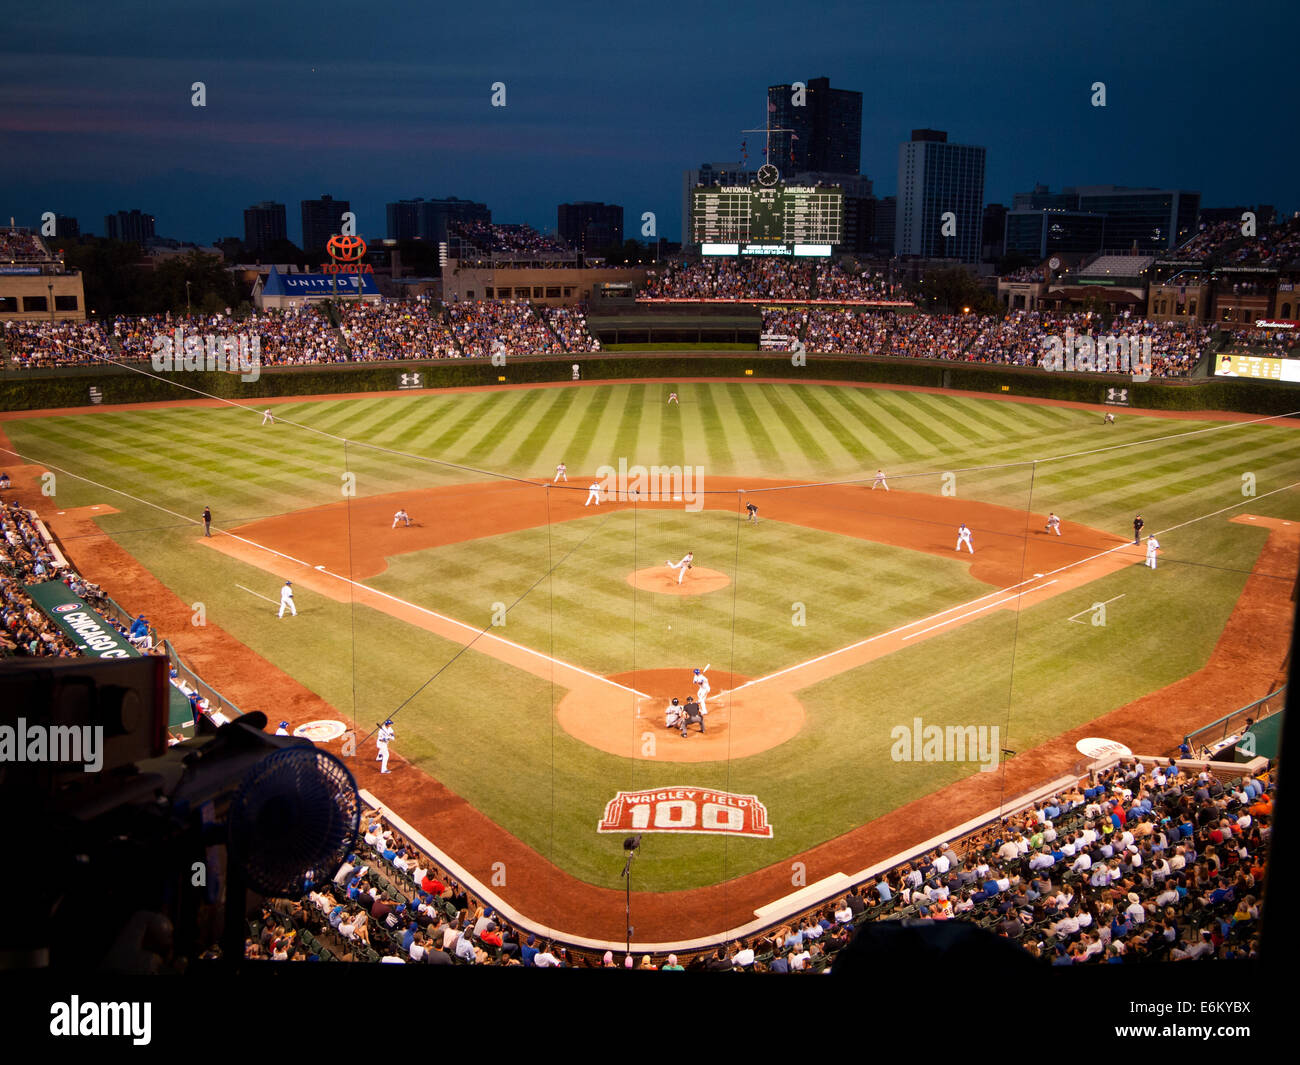 A view of Wrigley Field during a night game between the San Francisco Giants and Chicago Cubs on August 20, 2014. Stock Photo